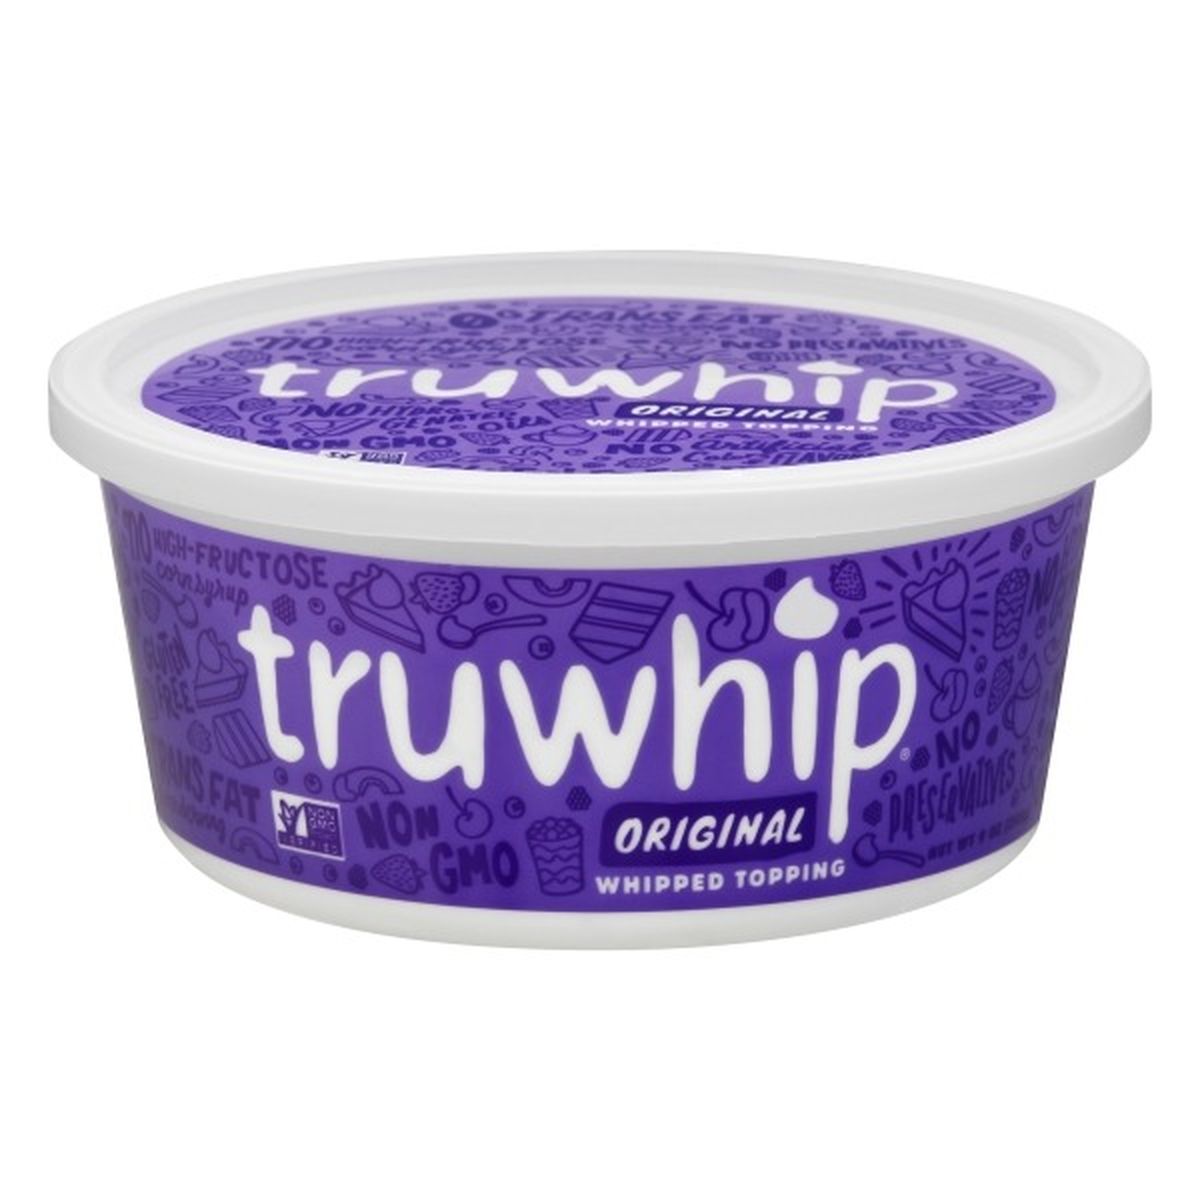 Calories in Truwhip Whipped Topping, Original